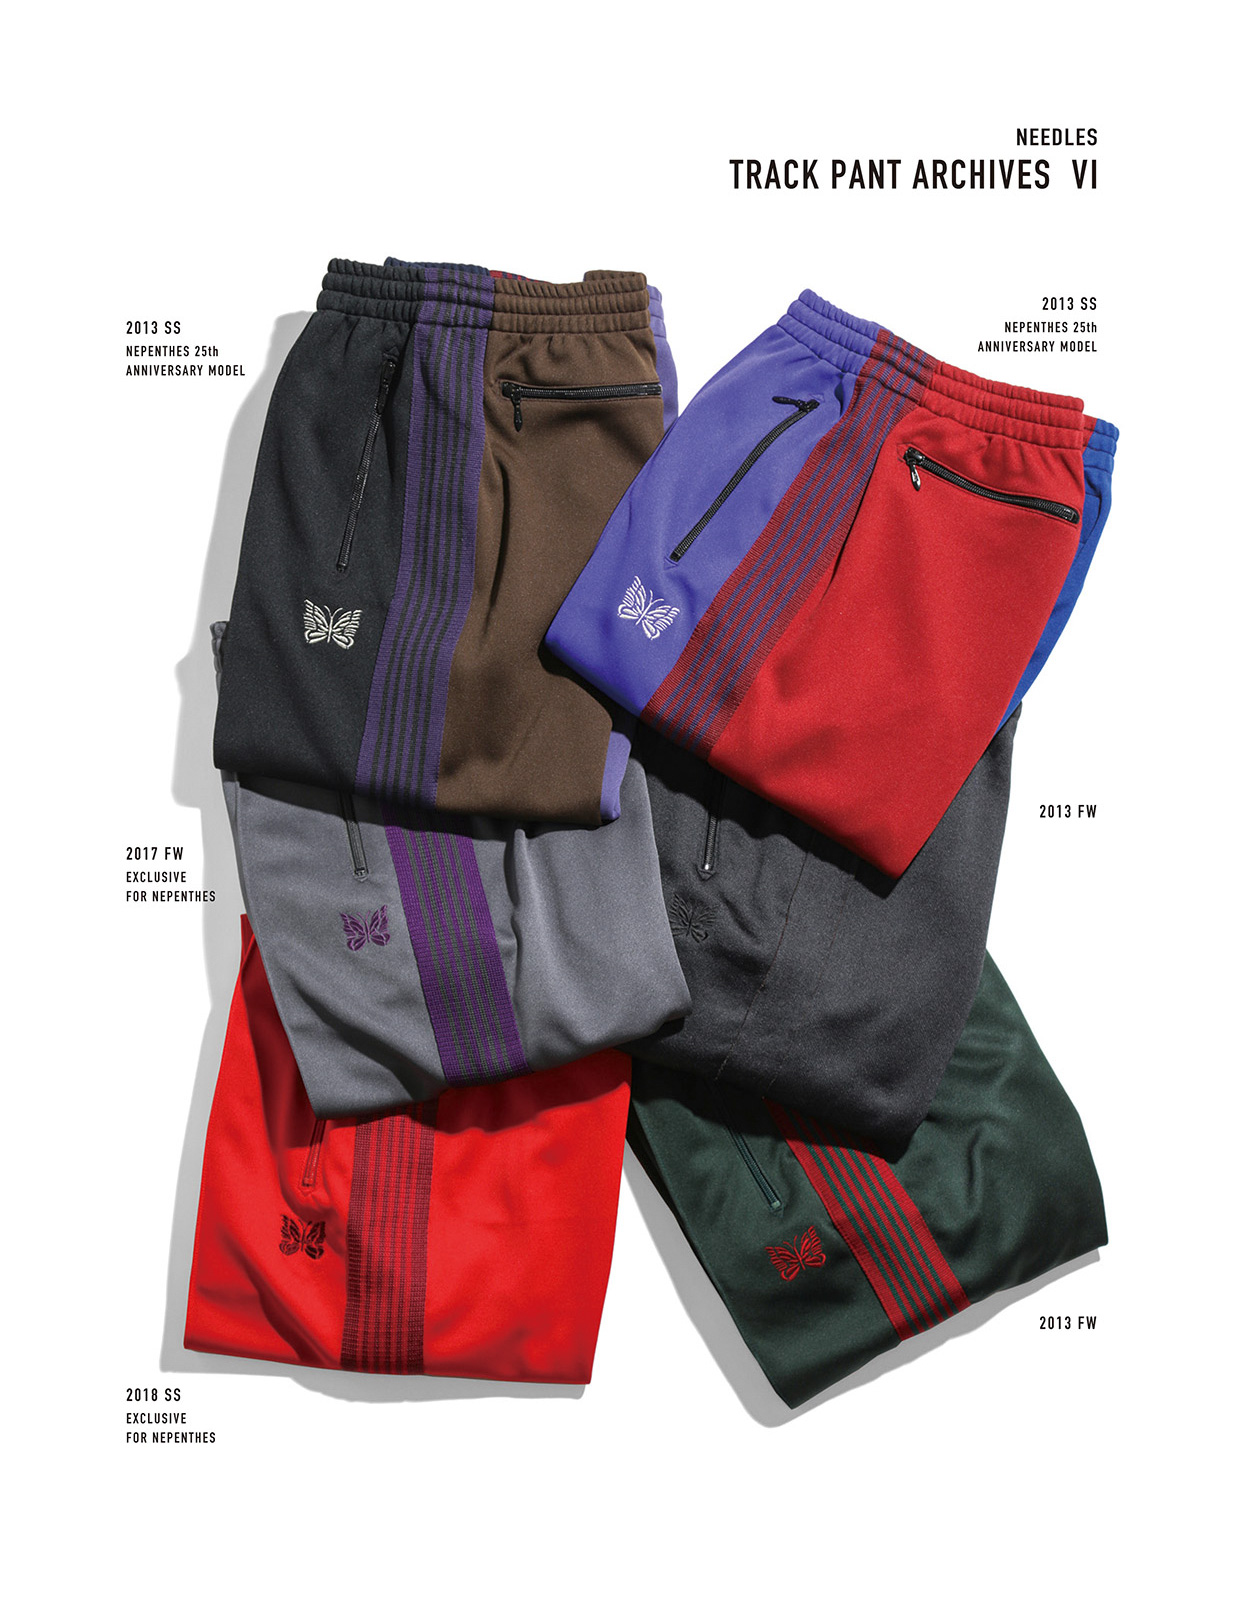 NEEDLES TRACK PANT ARCHIVES Ⅵ